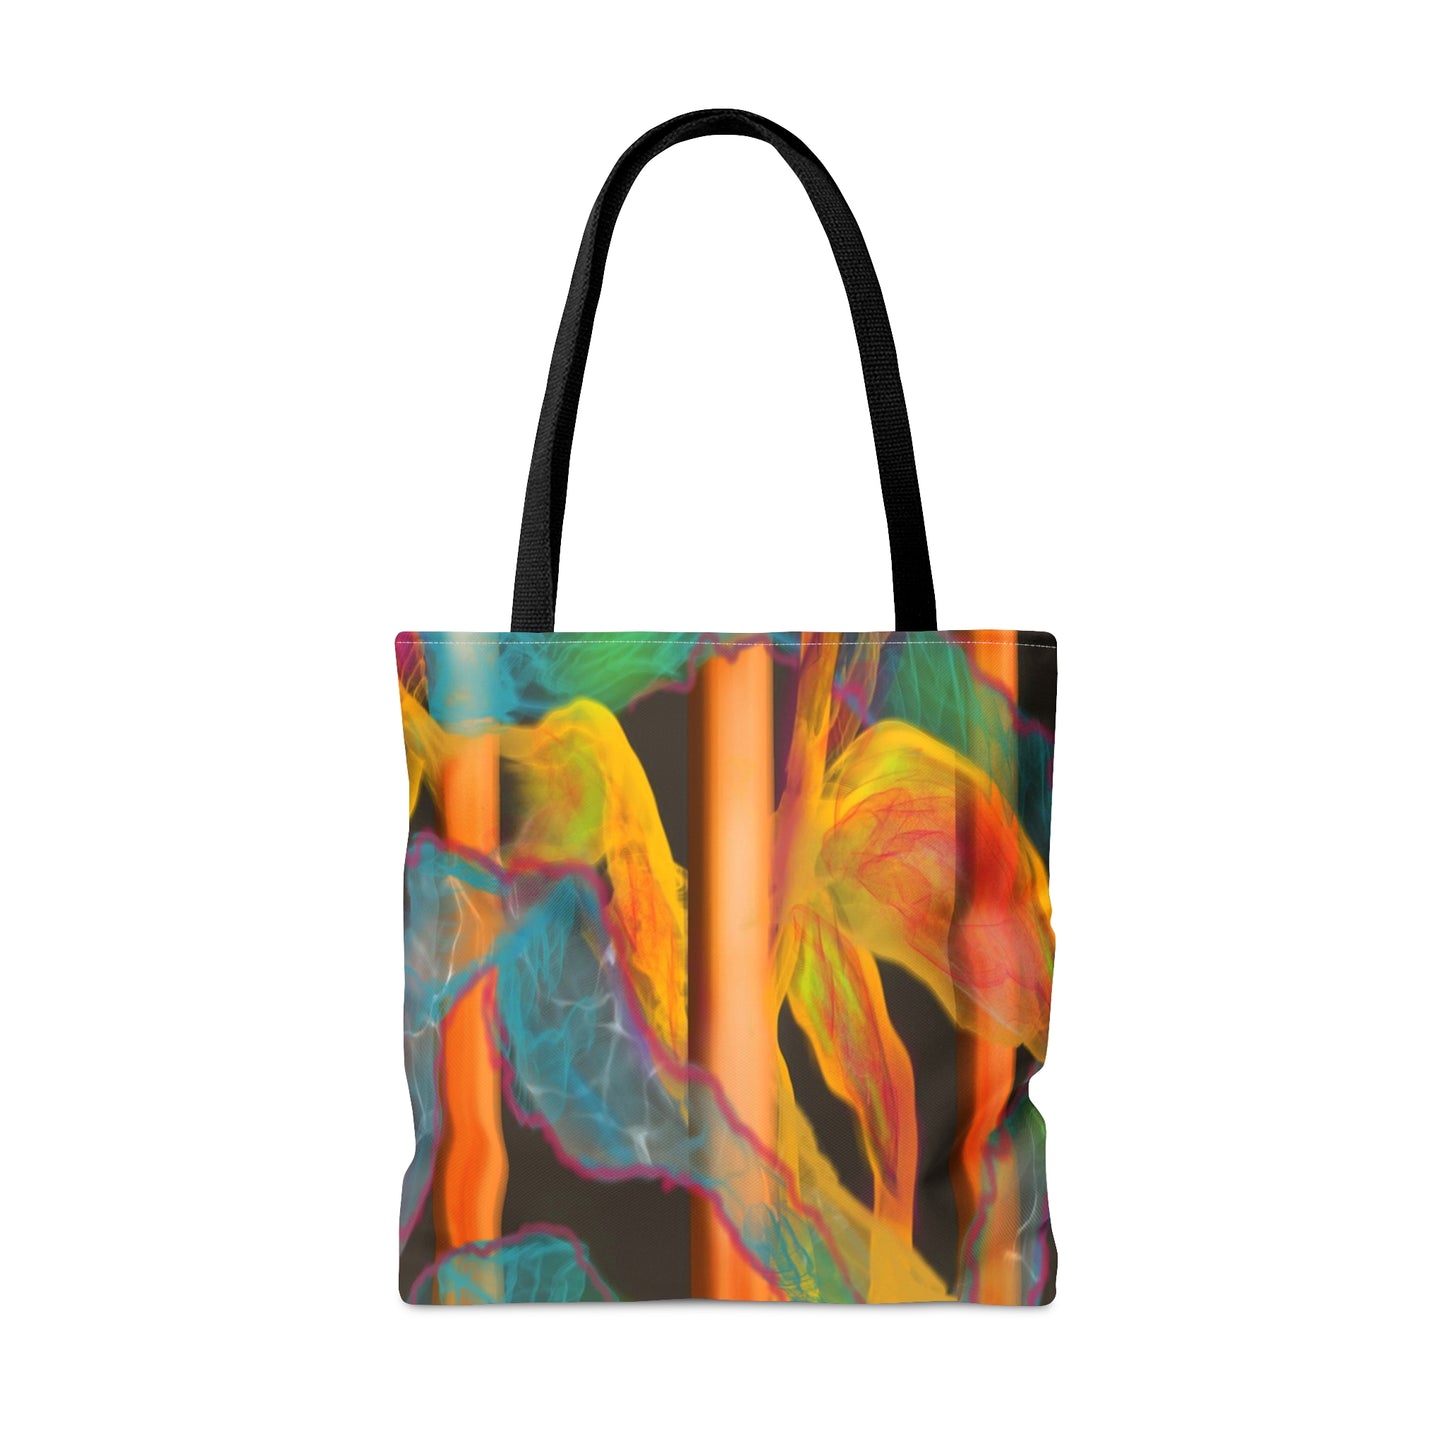 Copper Rods Tote makes canvas look like metal and smoke.  Not bad, huh?